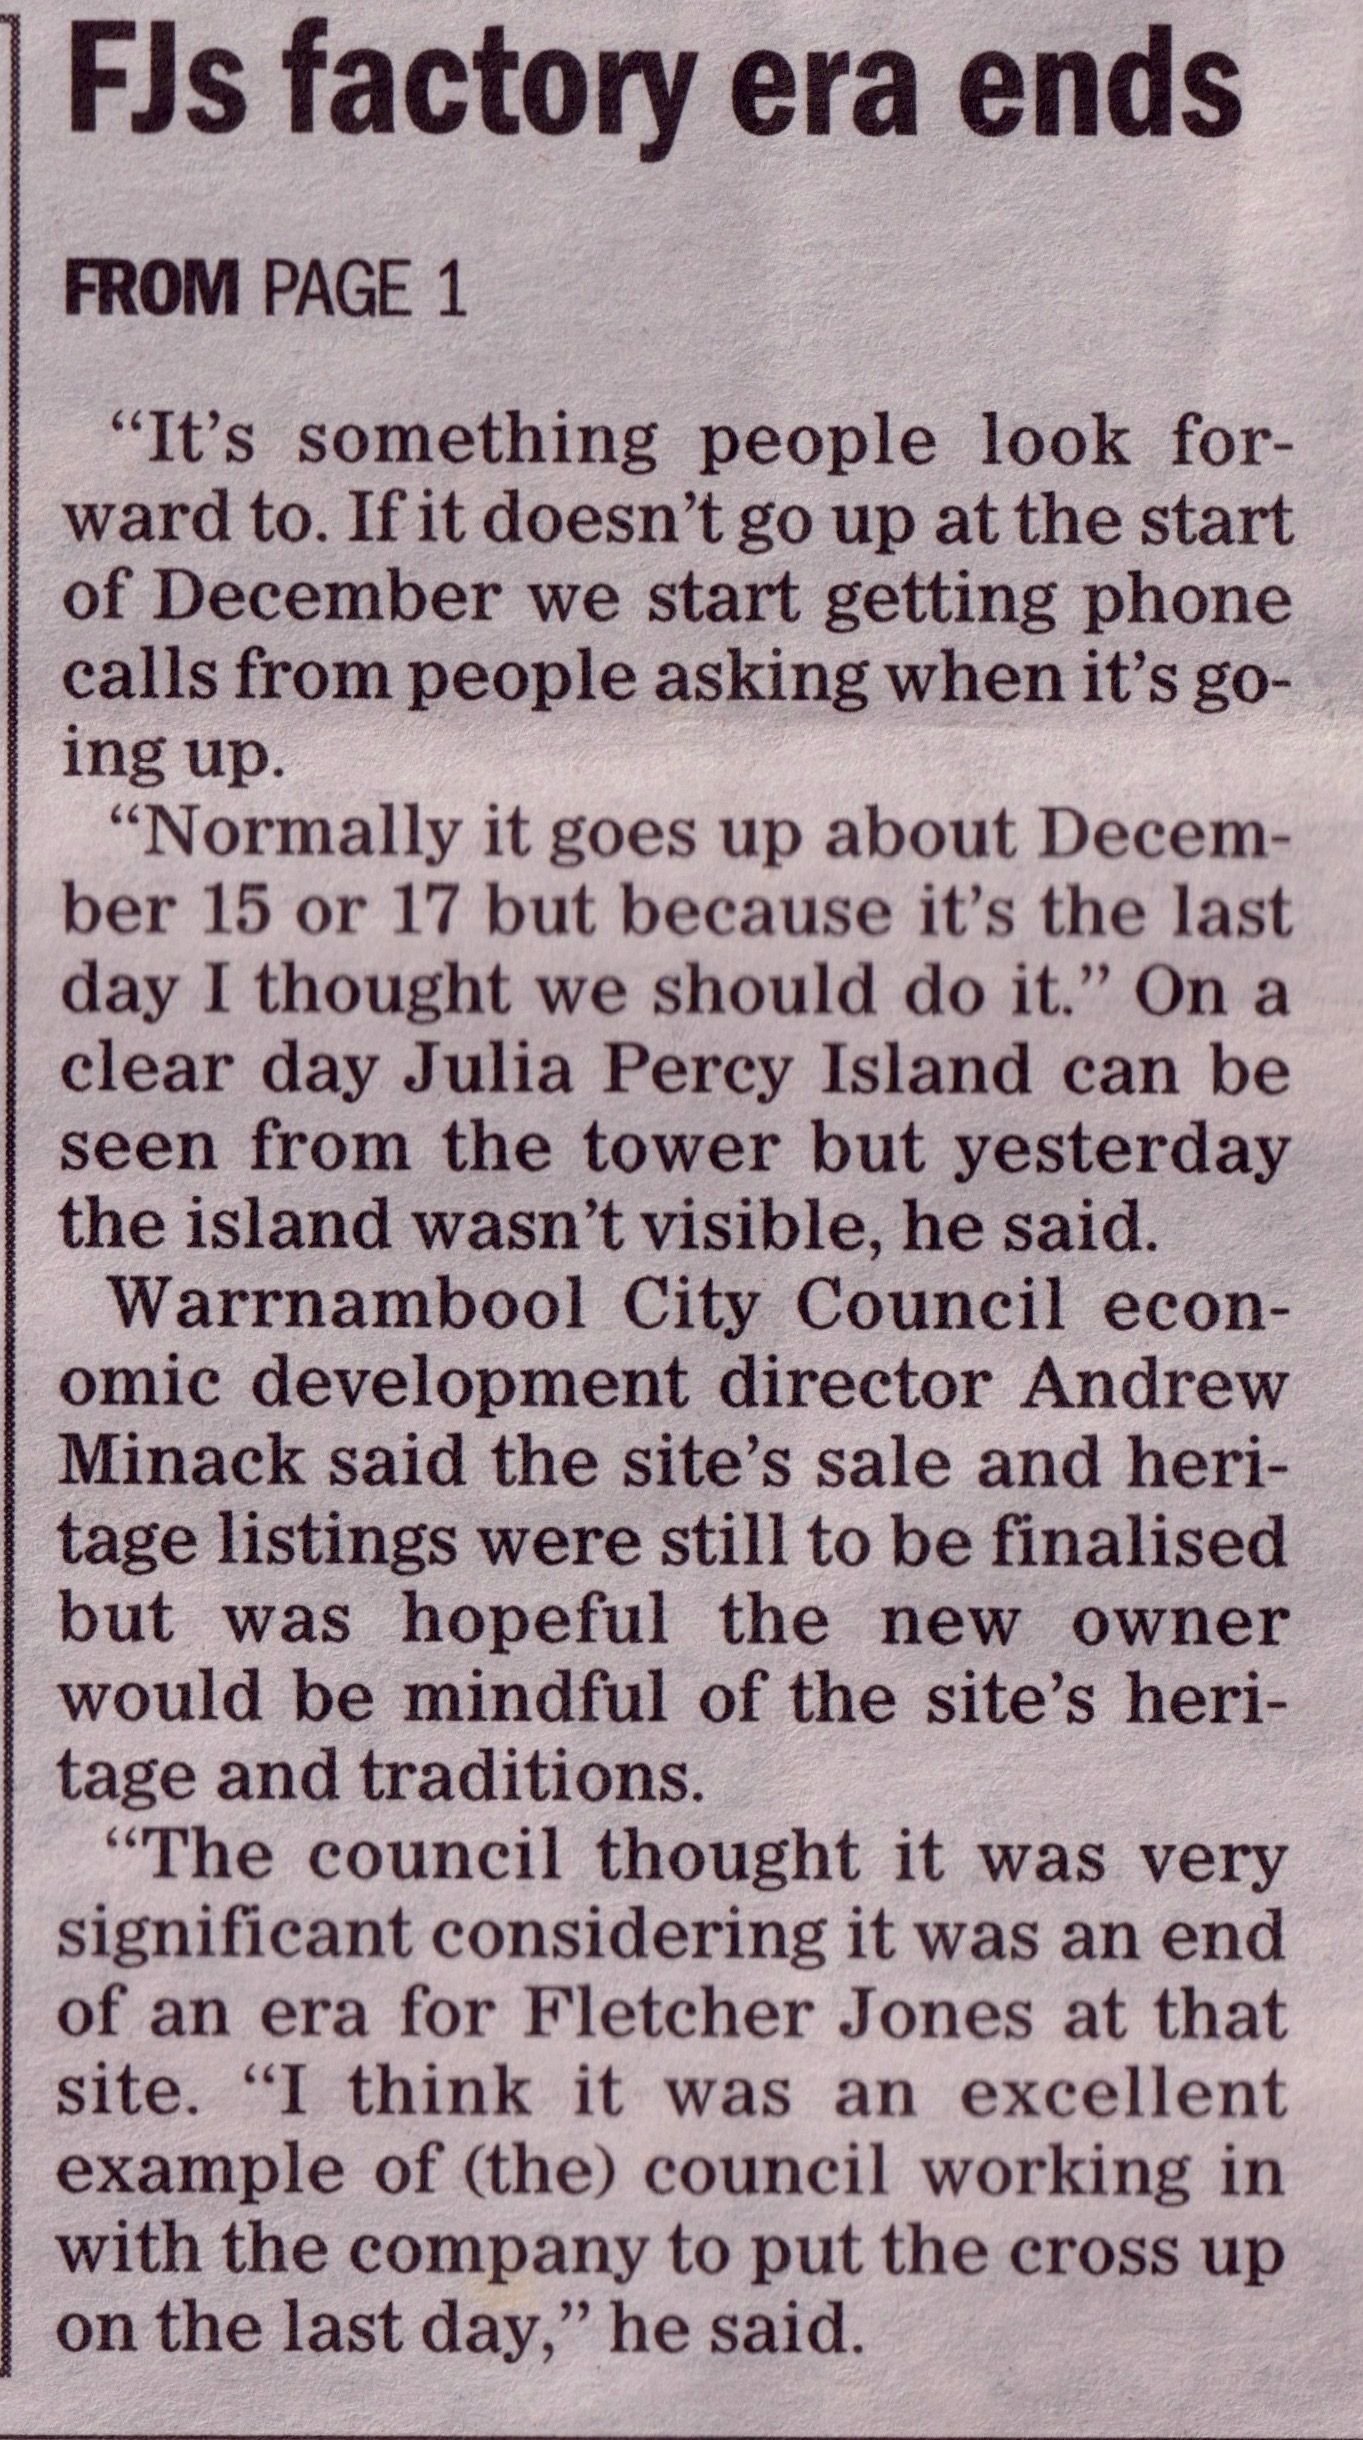 continued from page 1 Warrnambool Standard Saturday November 26, 2005.